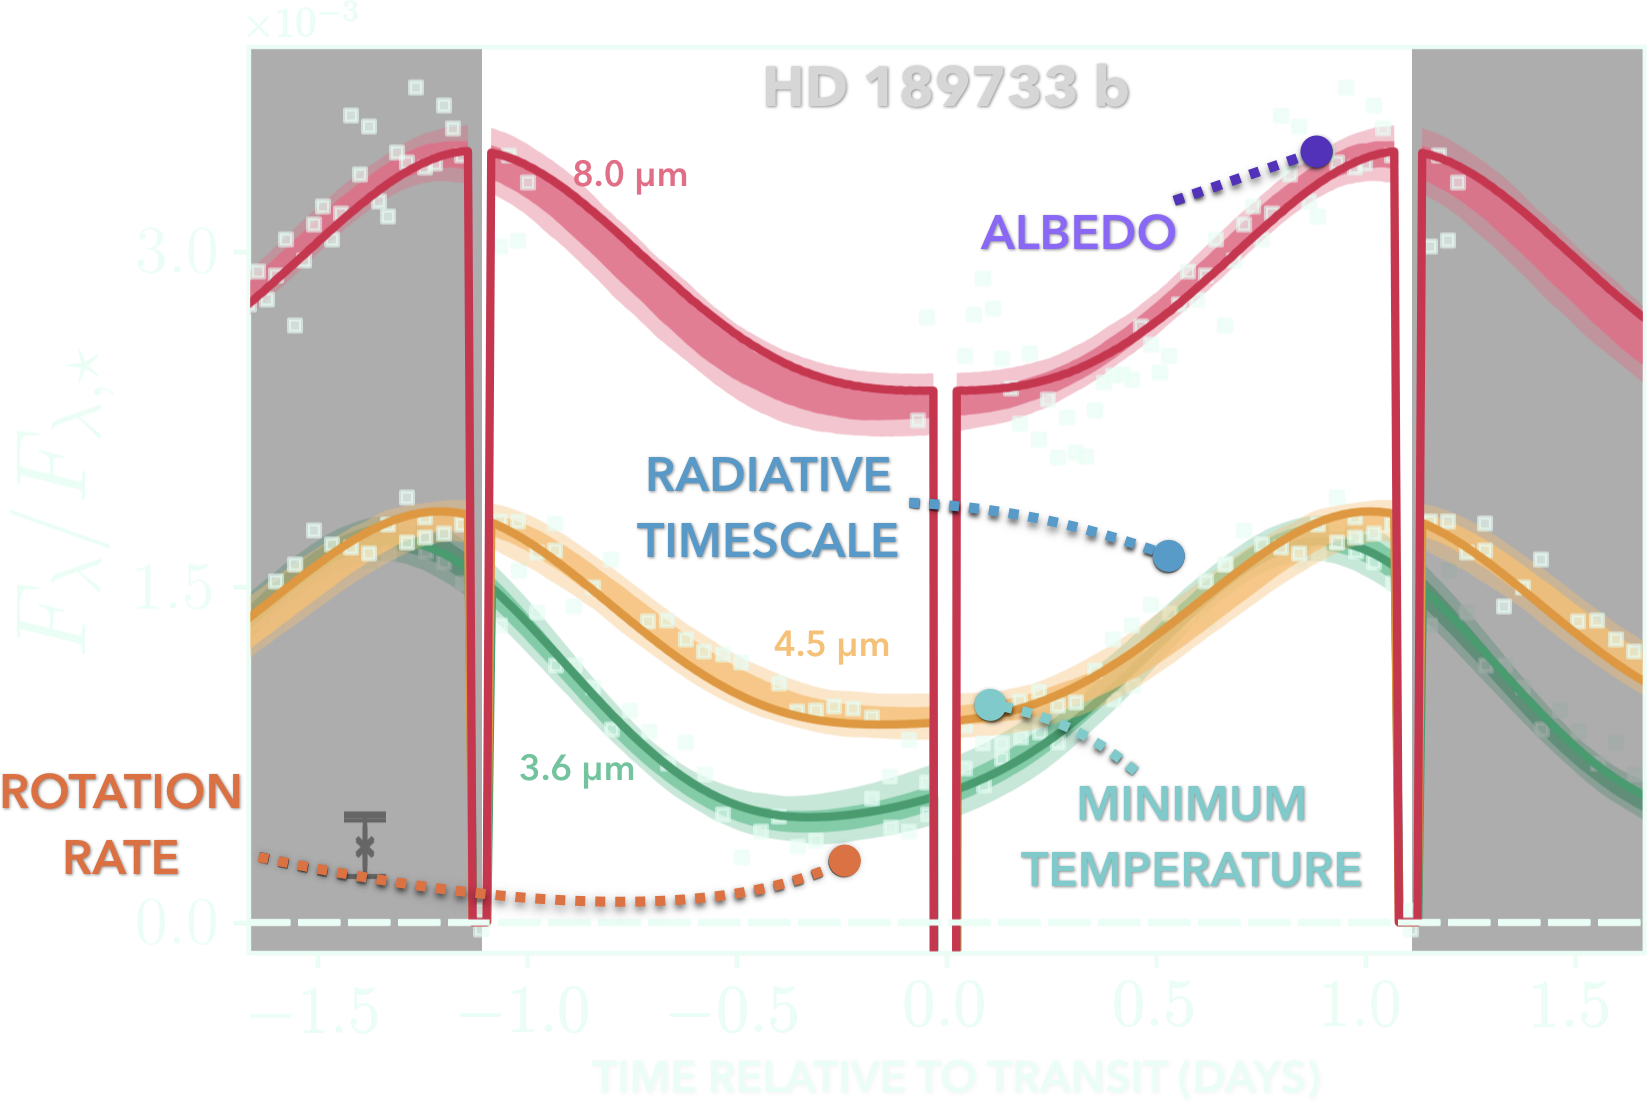 Thermal phase curves for HD 189733 b